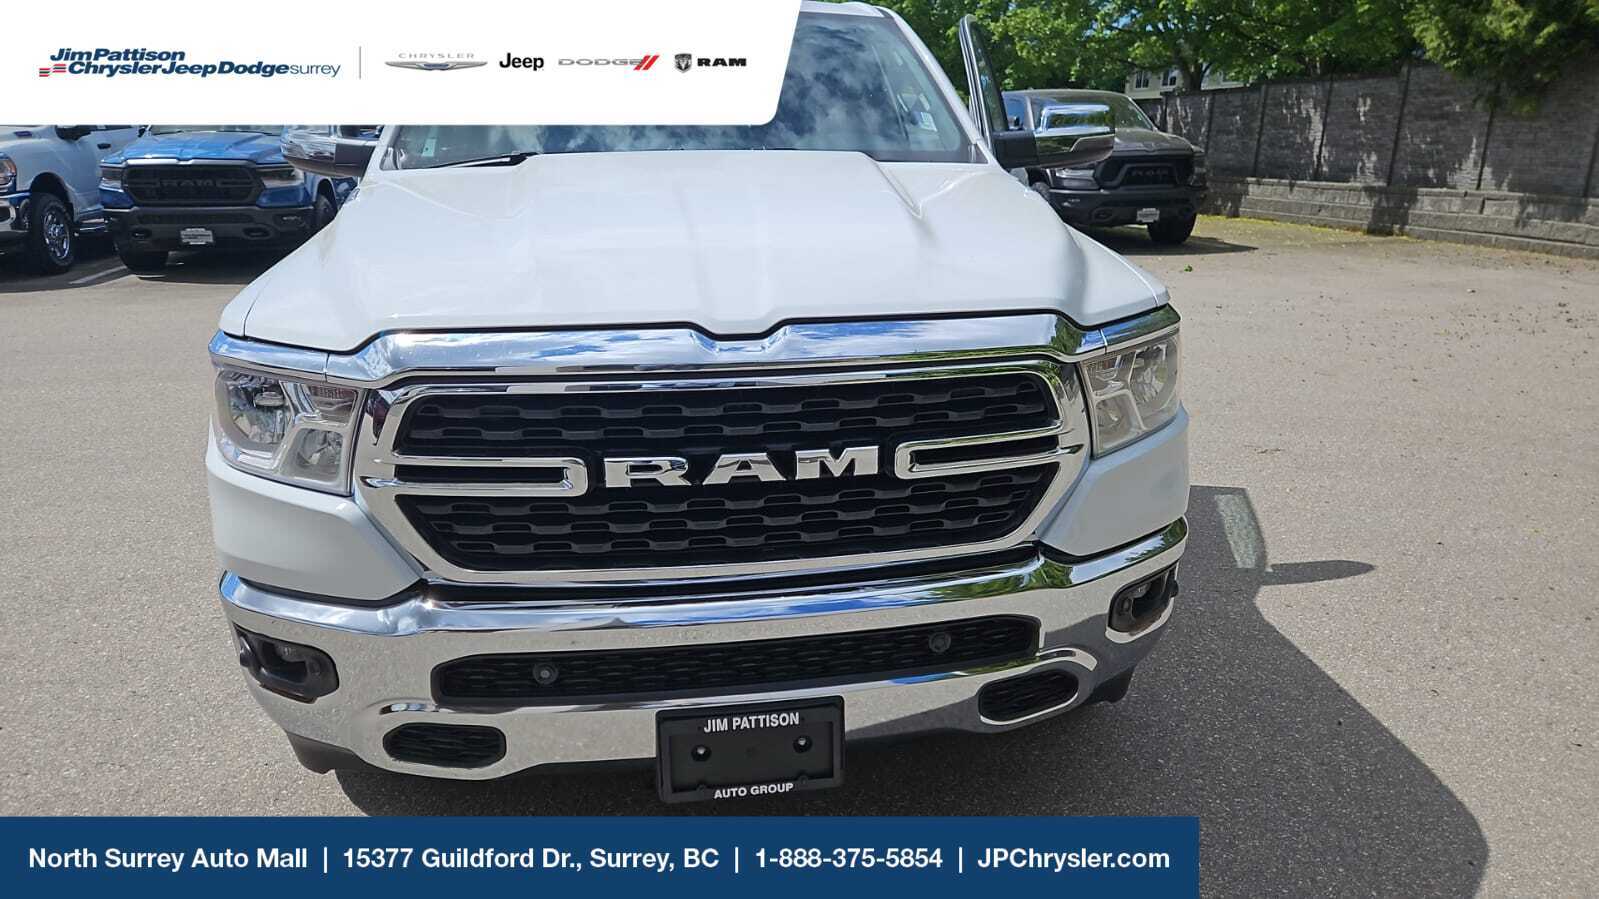 2023 Ram 1500 4x4, Level 2 equip. group, Clean Carfax